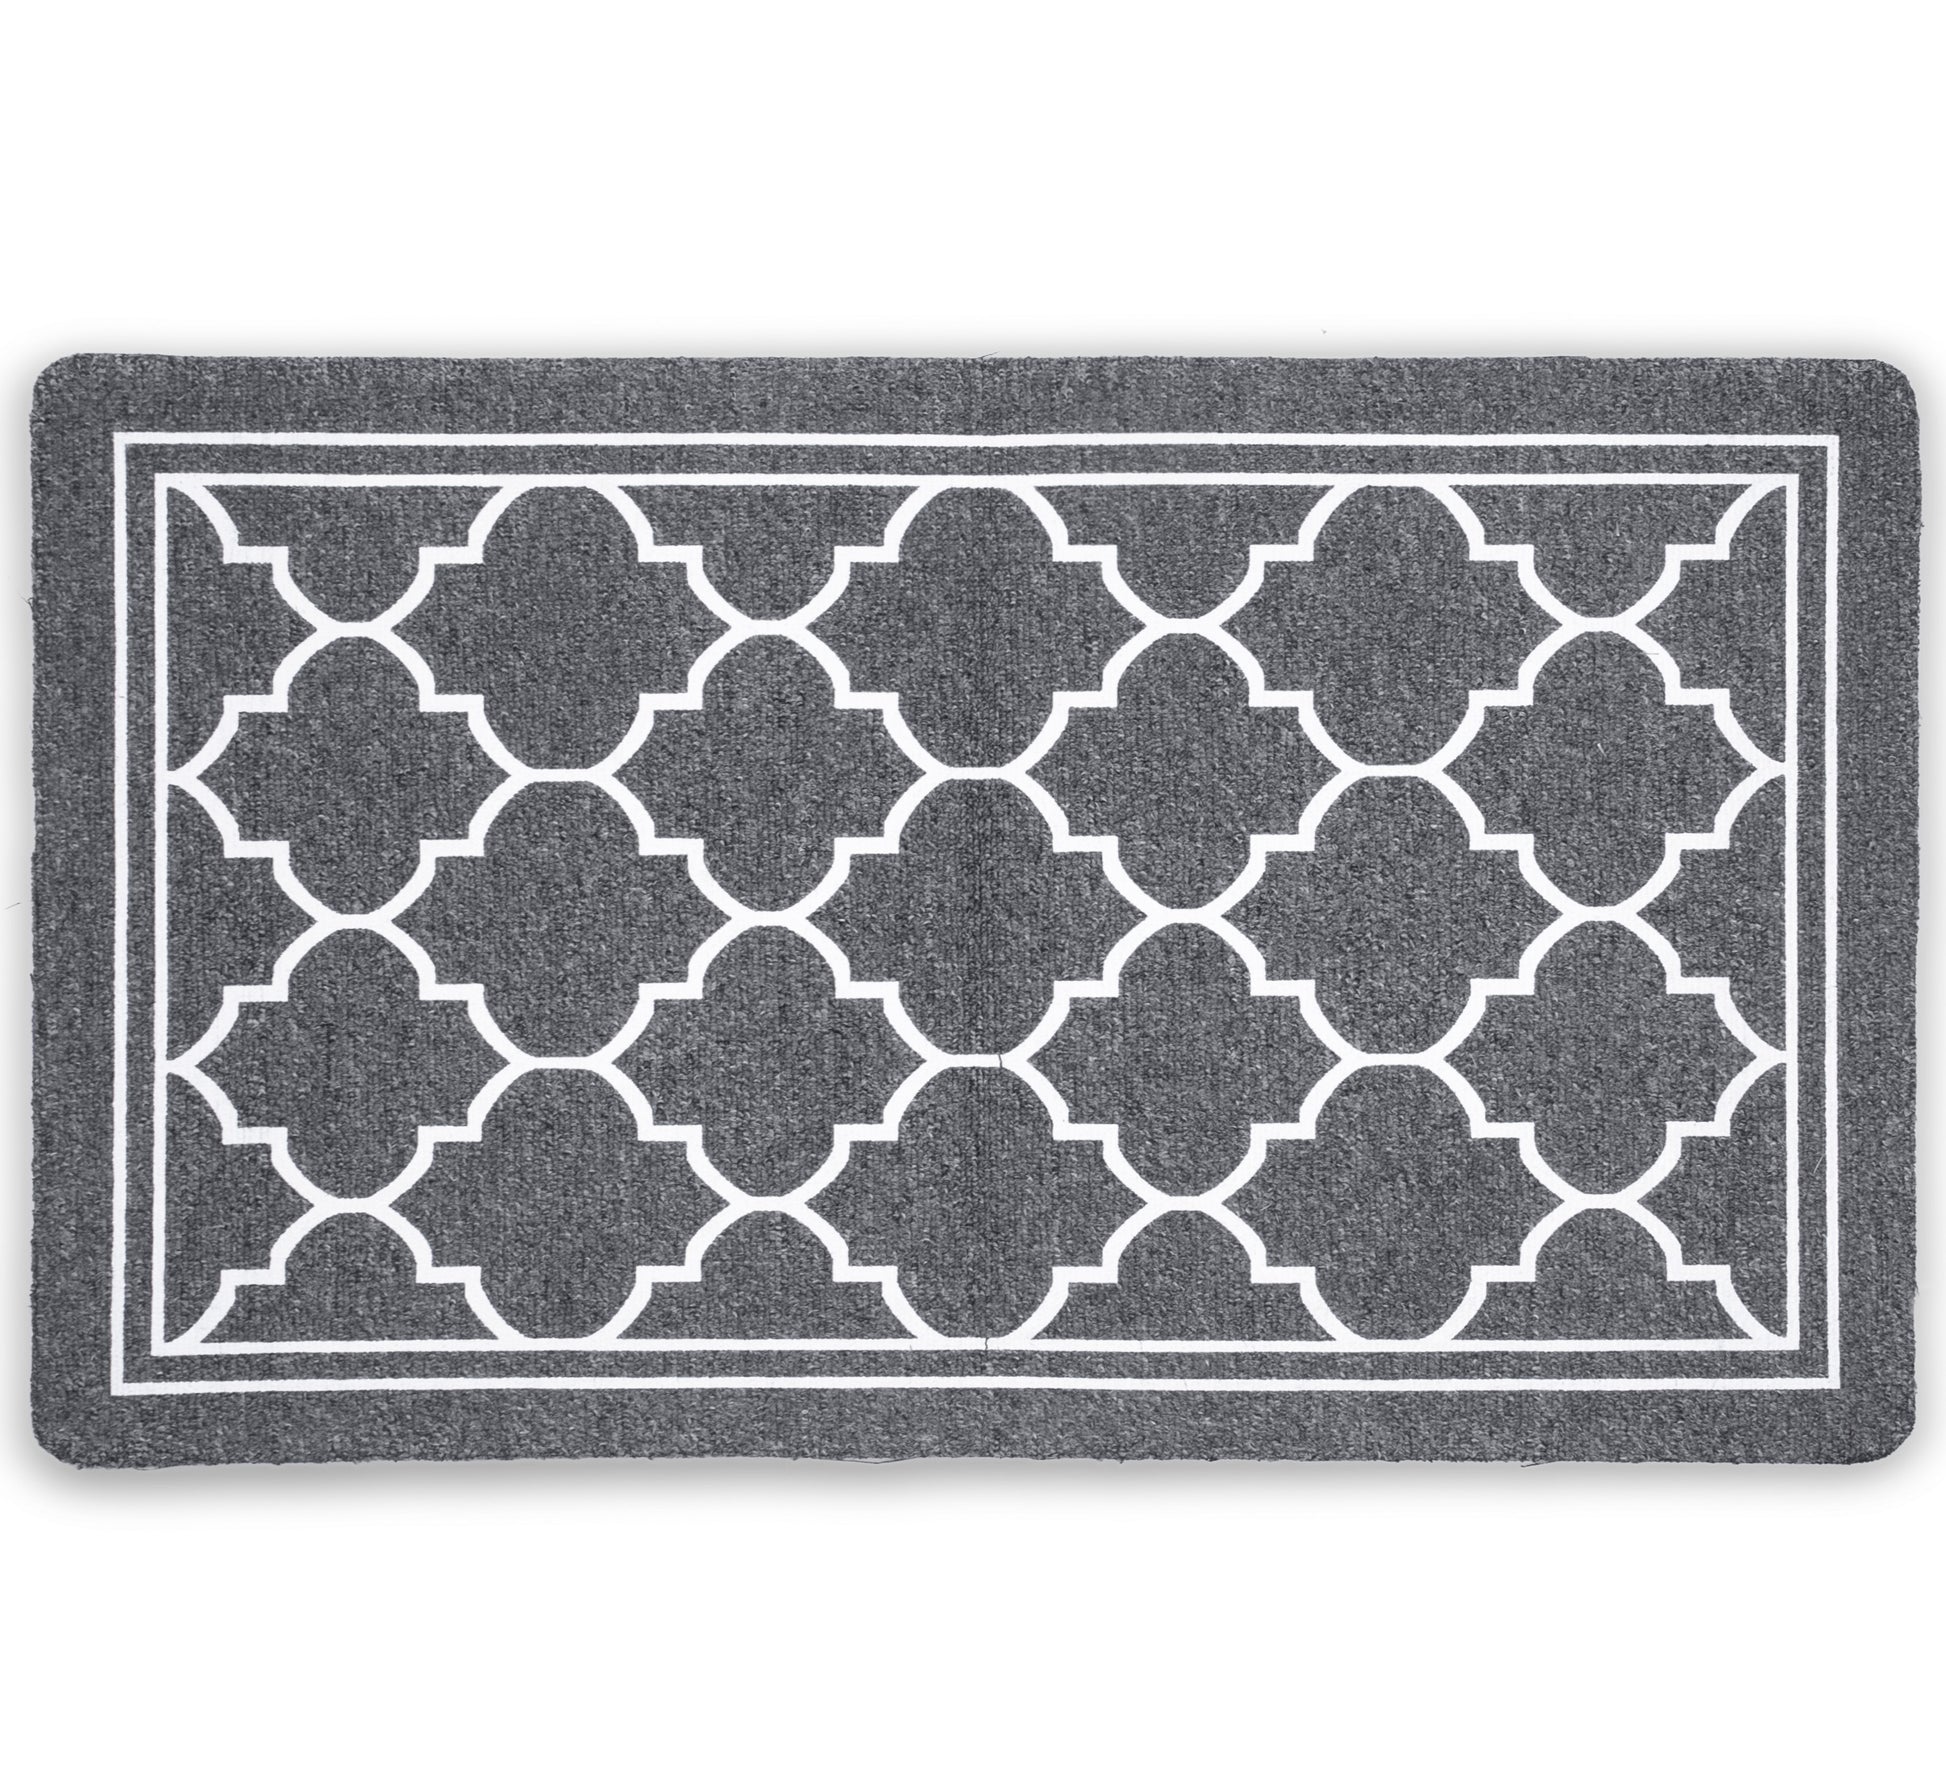 Yipa 30 x 18 Inch Indoor Half Round Front Door Mat Inside Dirt Trapper  Entrance Rug for Front Door with Non Slip Rubber Backing Machine Washable,  Gray Polyester Fiber 